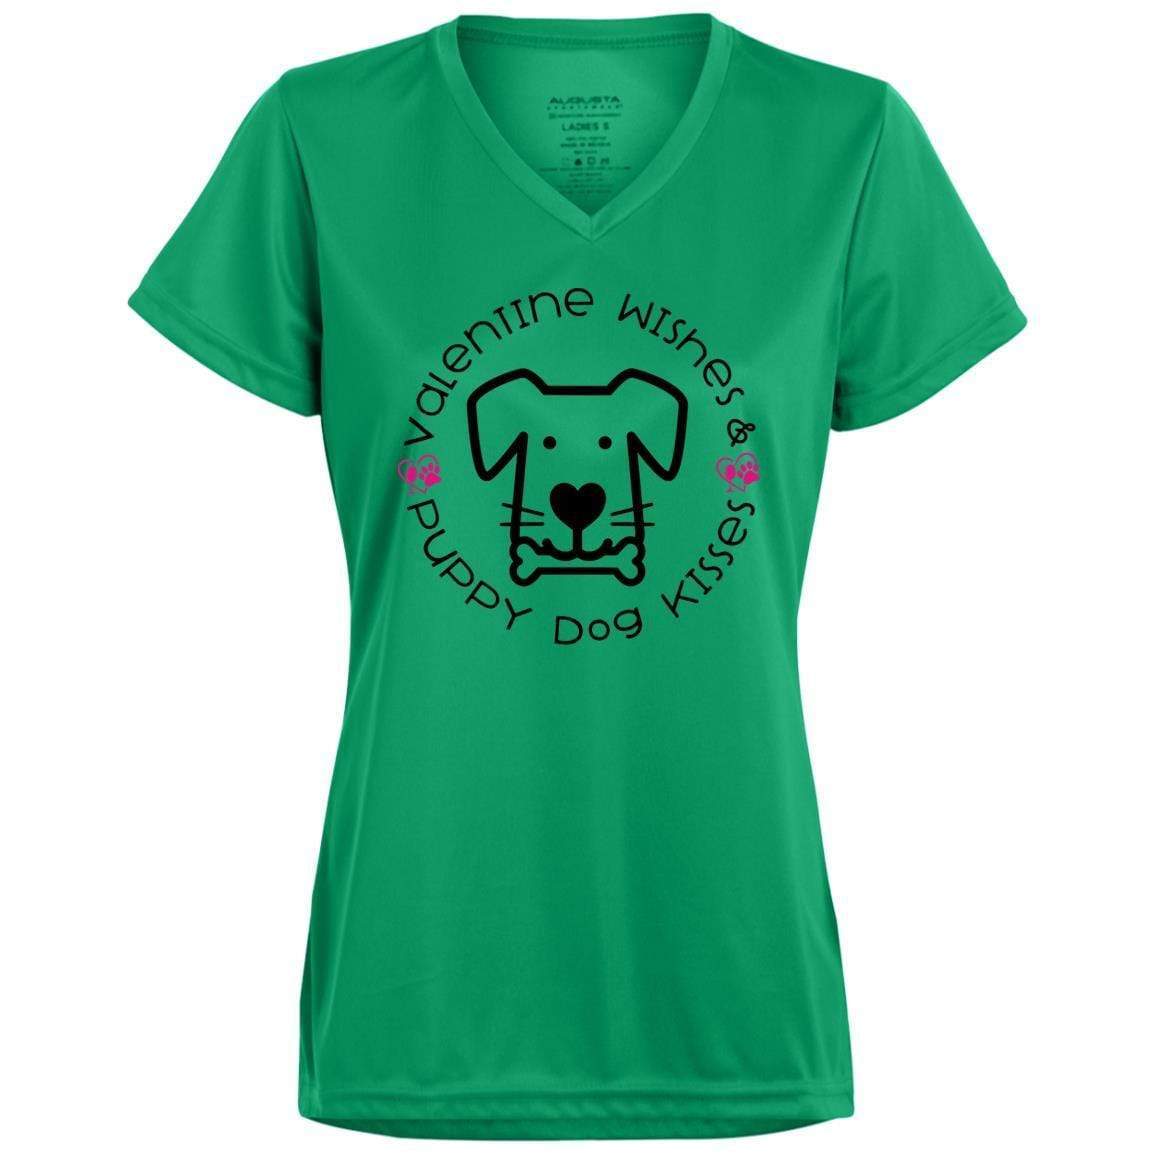 T-Shirts Kelly / X-Small Winey Bitches Co 'Valentine Wishes and Puppy Dog Kisses" (Dog) Ladies' Wicking T-Shirt WineyBitchesCo